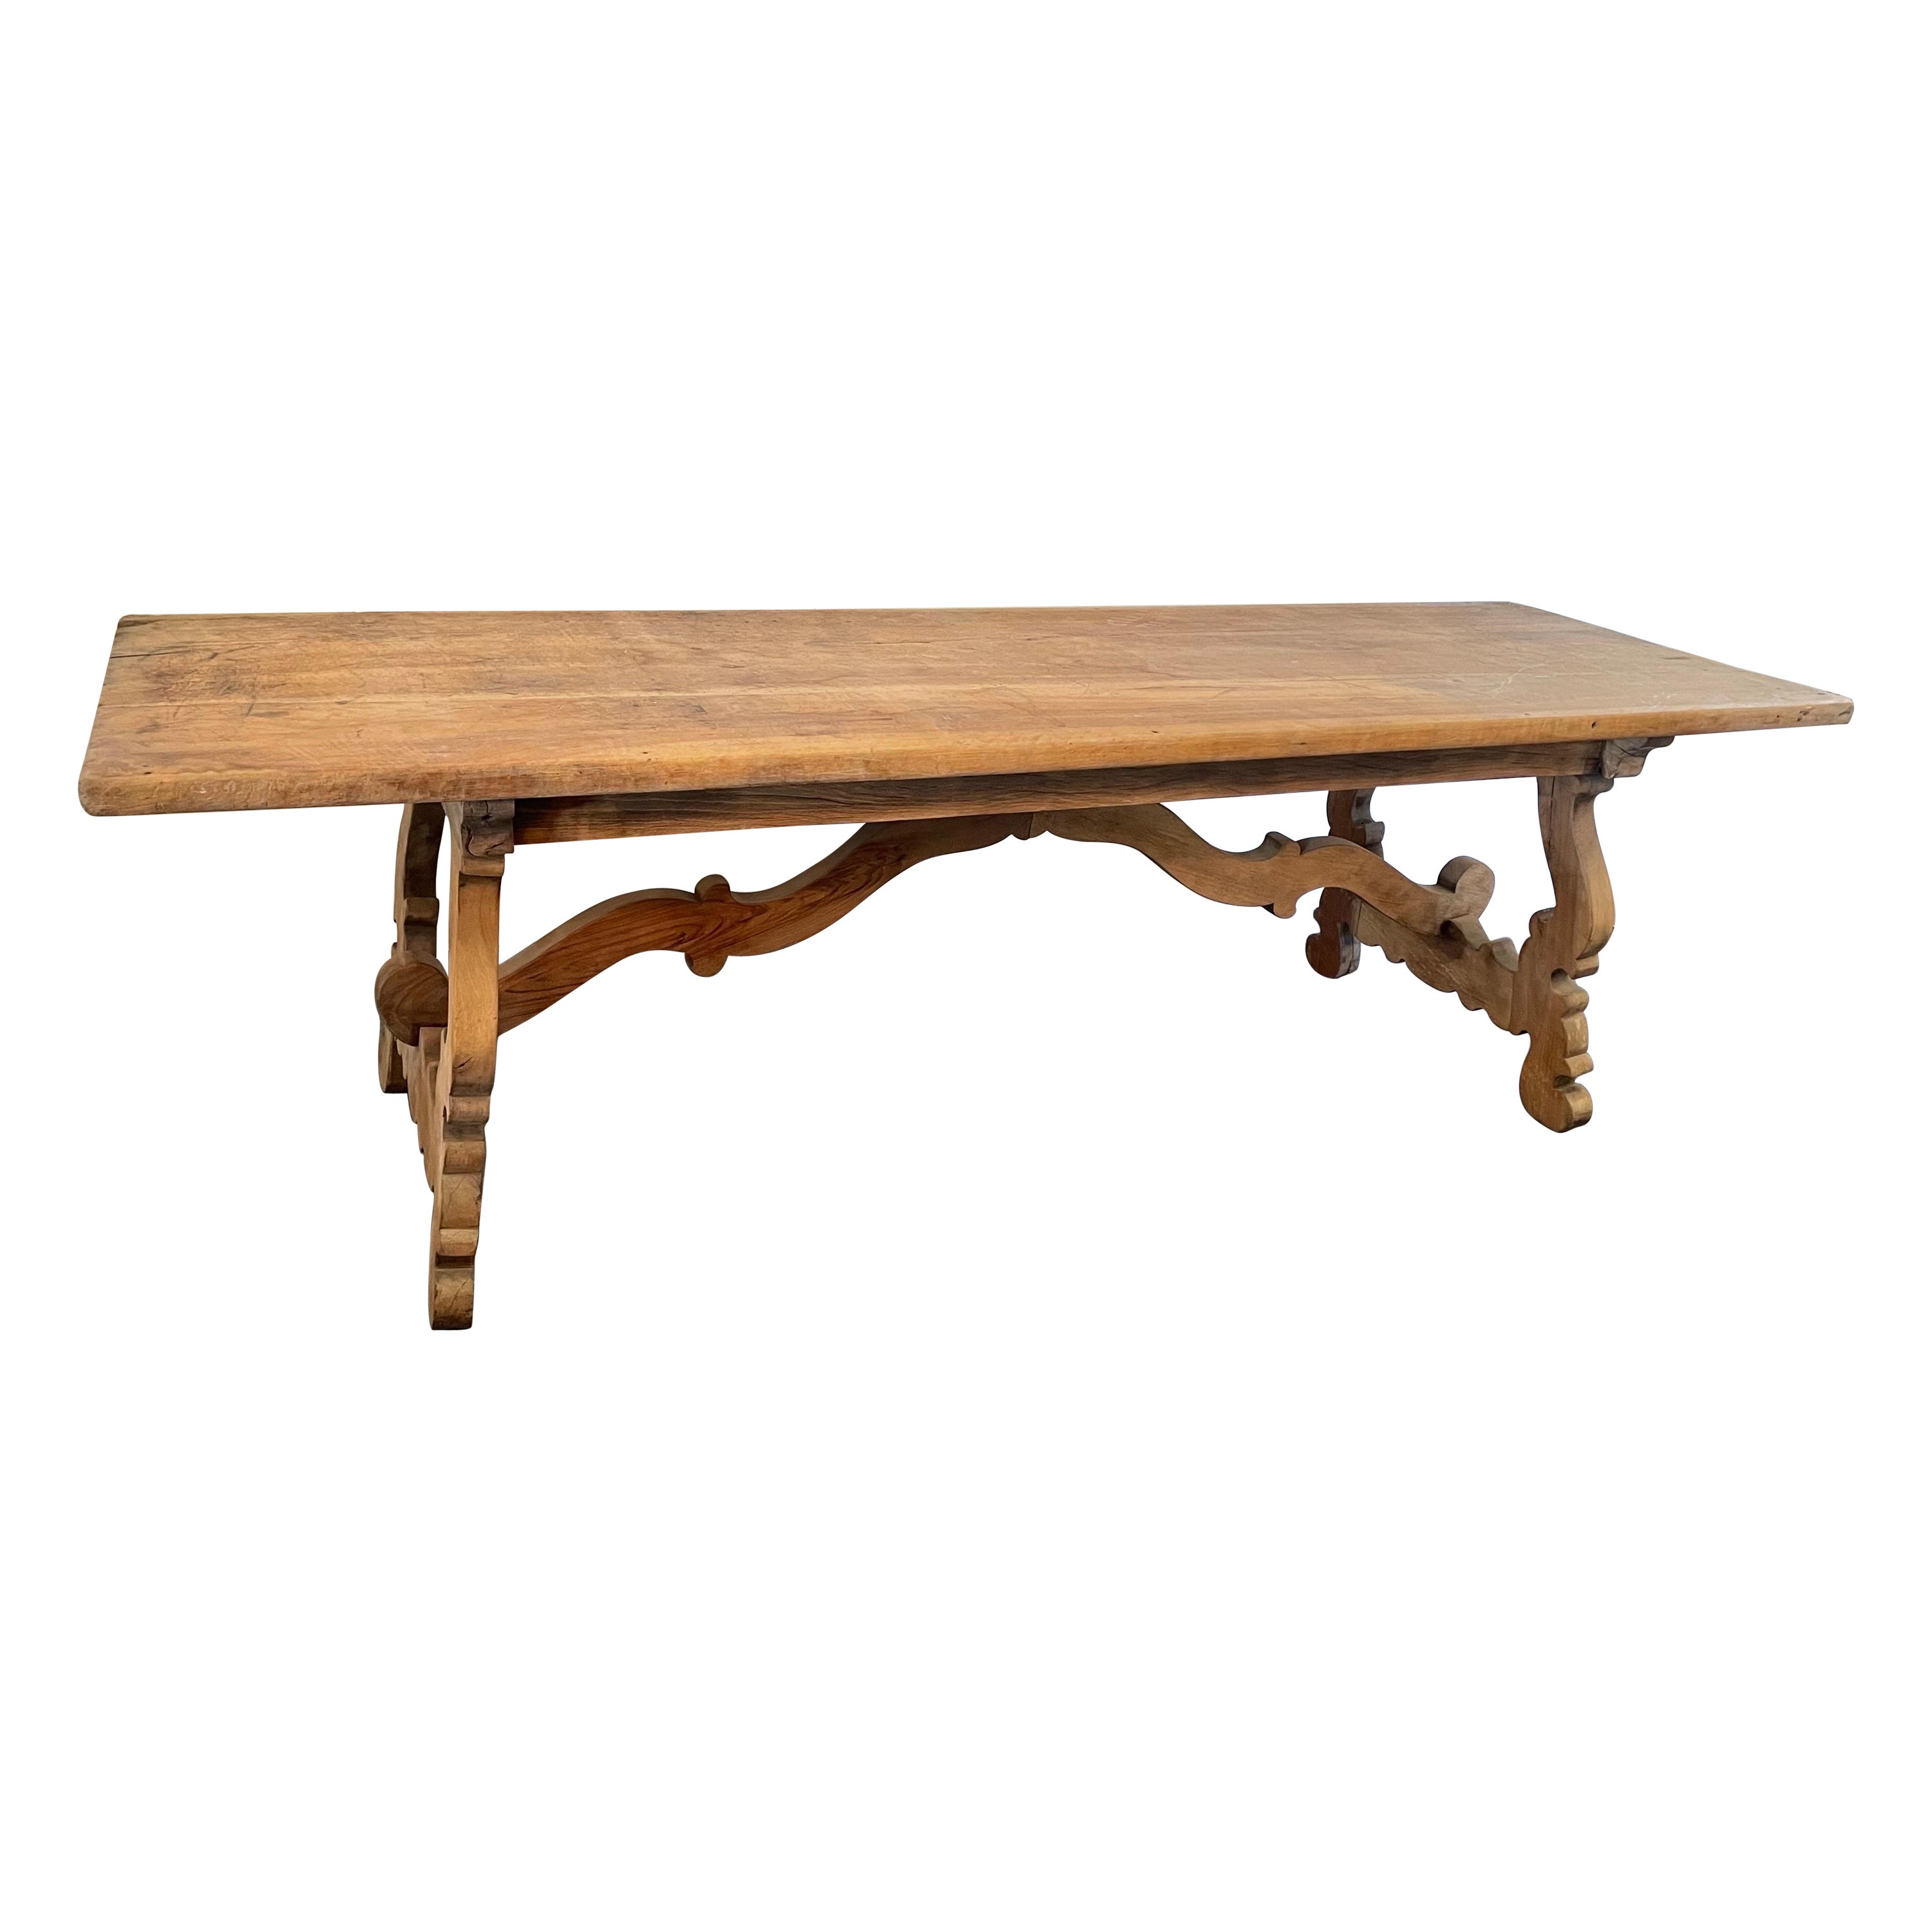 Italian 18th And 19th Century Tuscan Walnut Dining Table For Sale